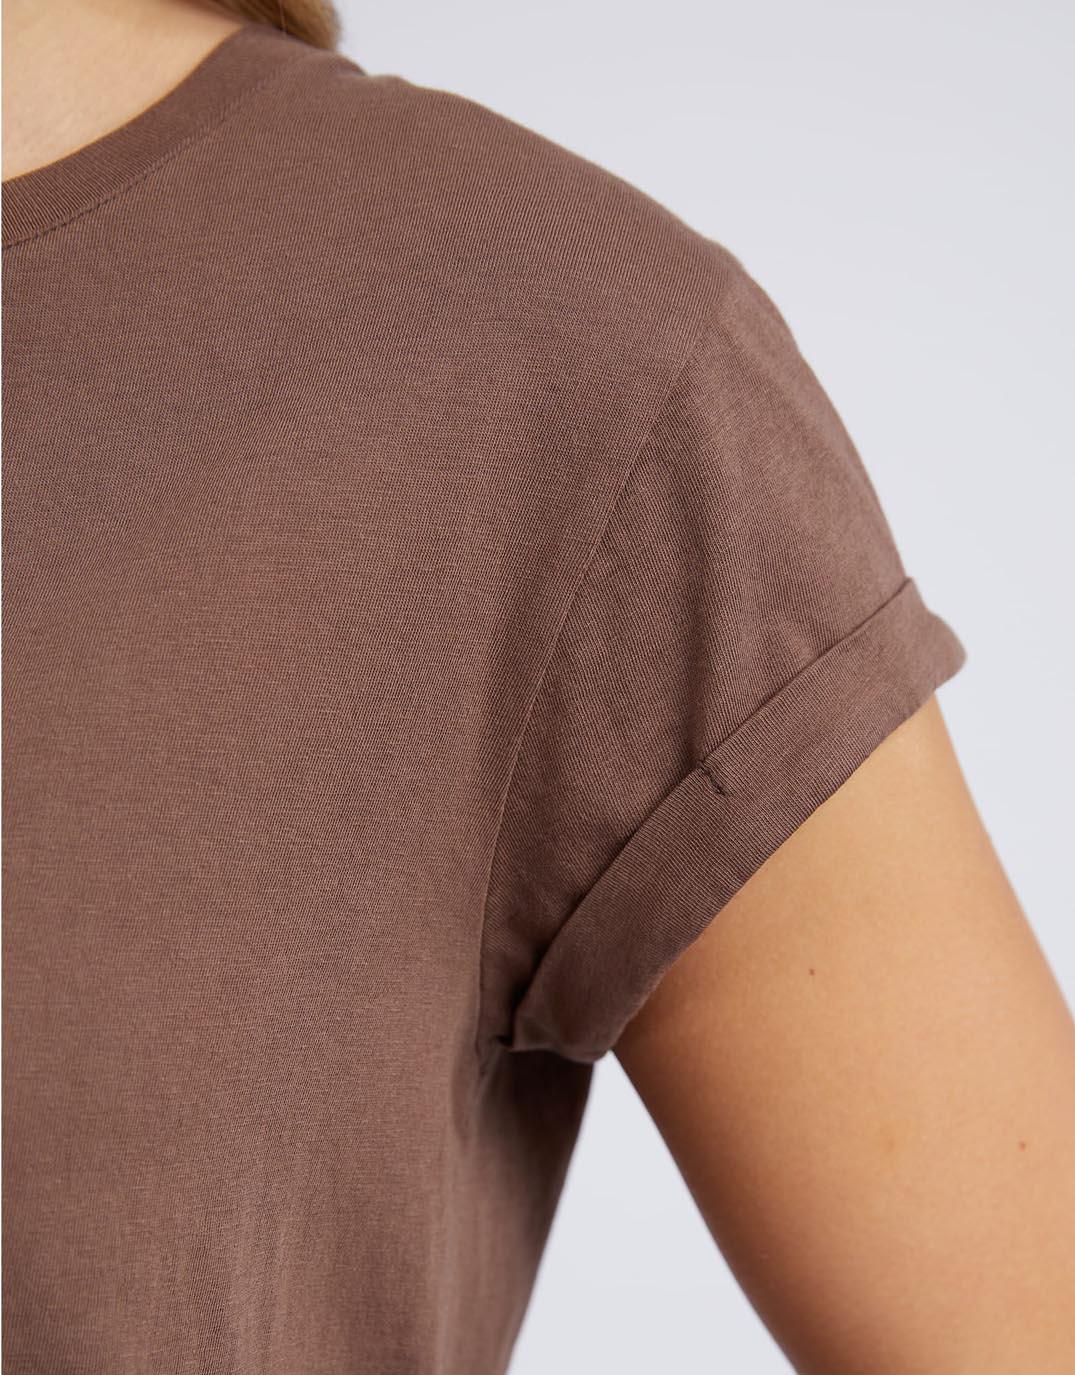 Foxwood - Manly Tee - Chocolate - White & Co Living Tops